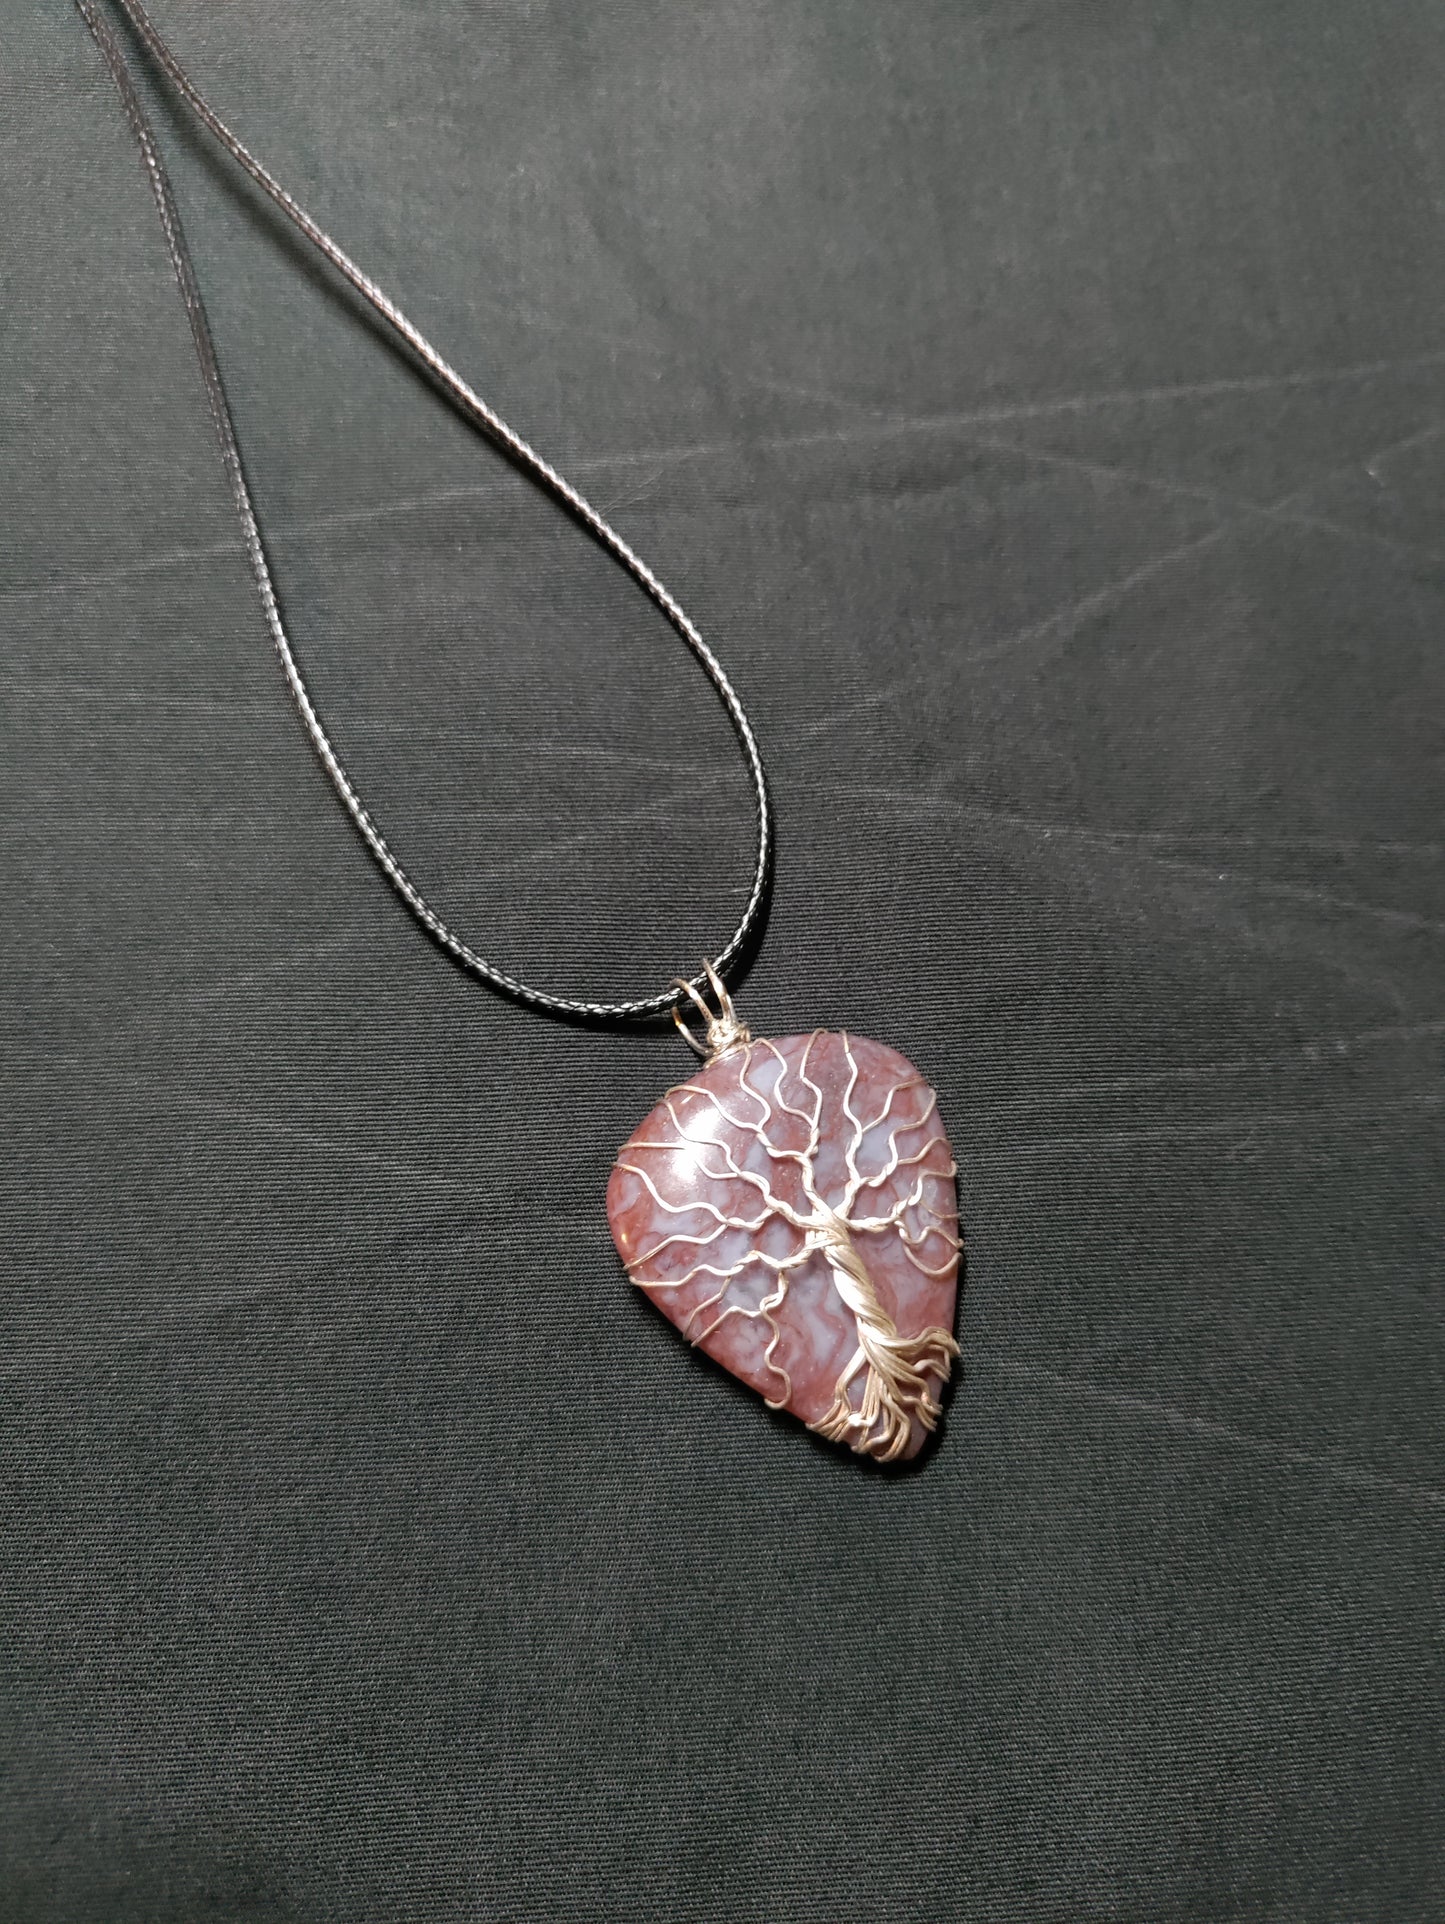 Tree Of Life Necklace - Red Moss Agate & Silver